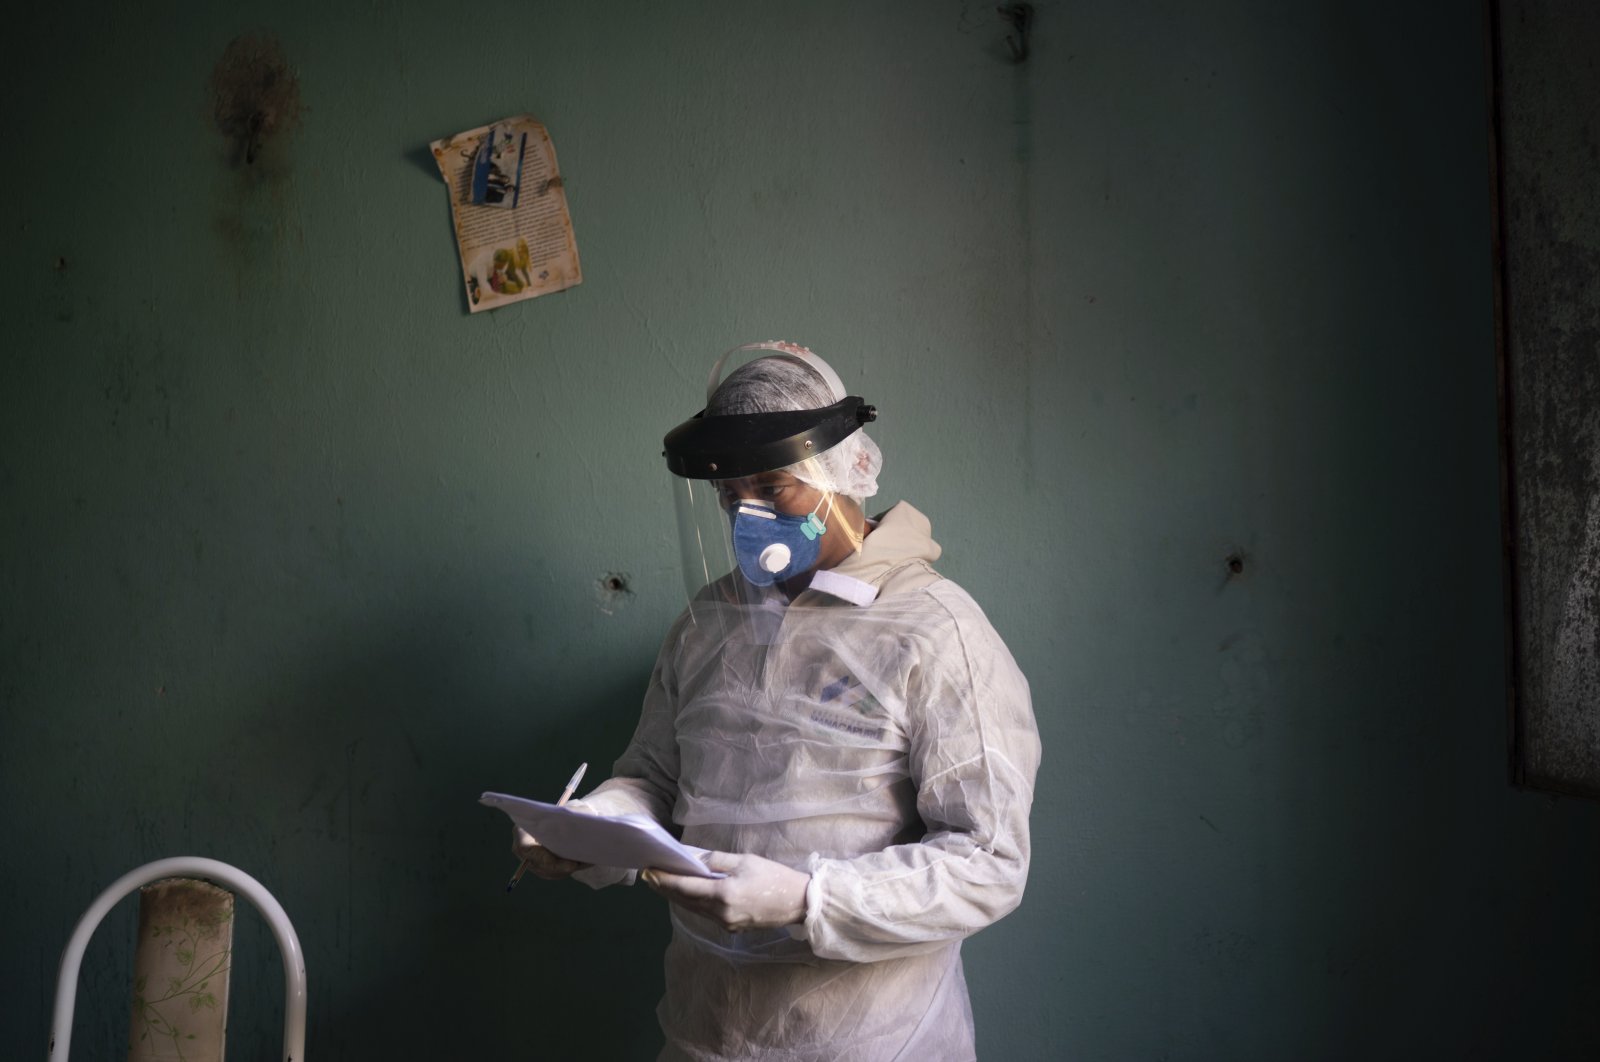 A health worker takes notes as he prepares to collect material for a COVID-19 test on an elderly woman, Manacapuru, Brazil, June 3, 2020. (AP Photo)